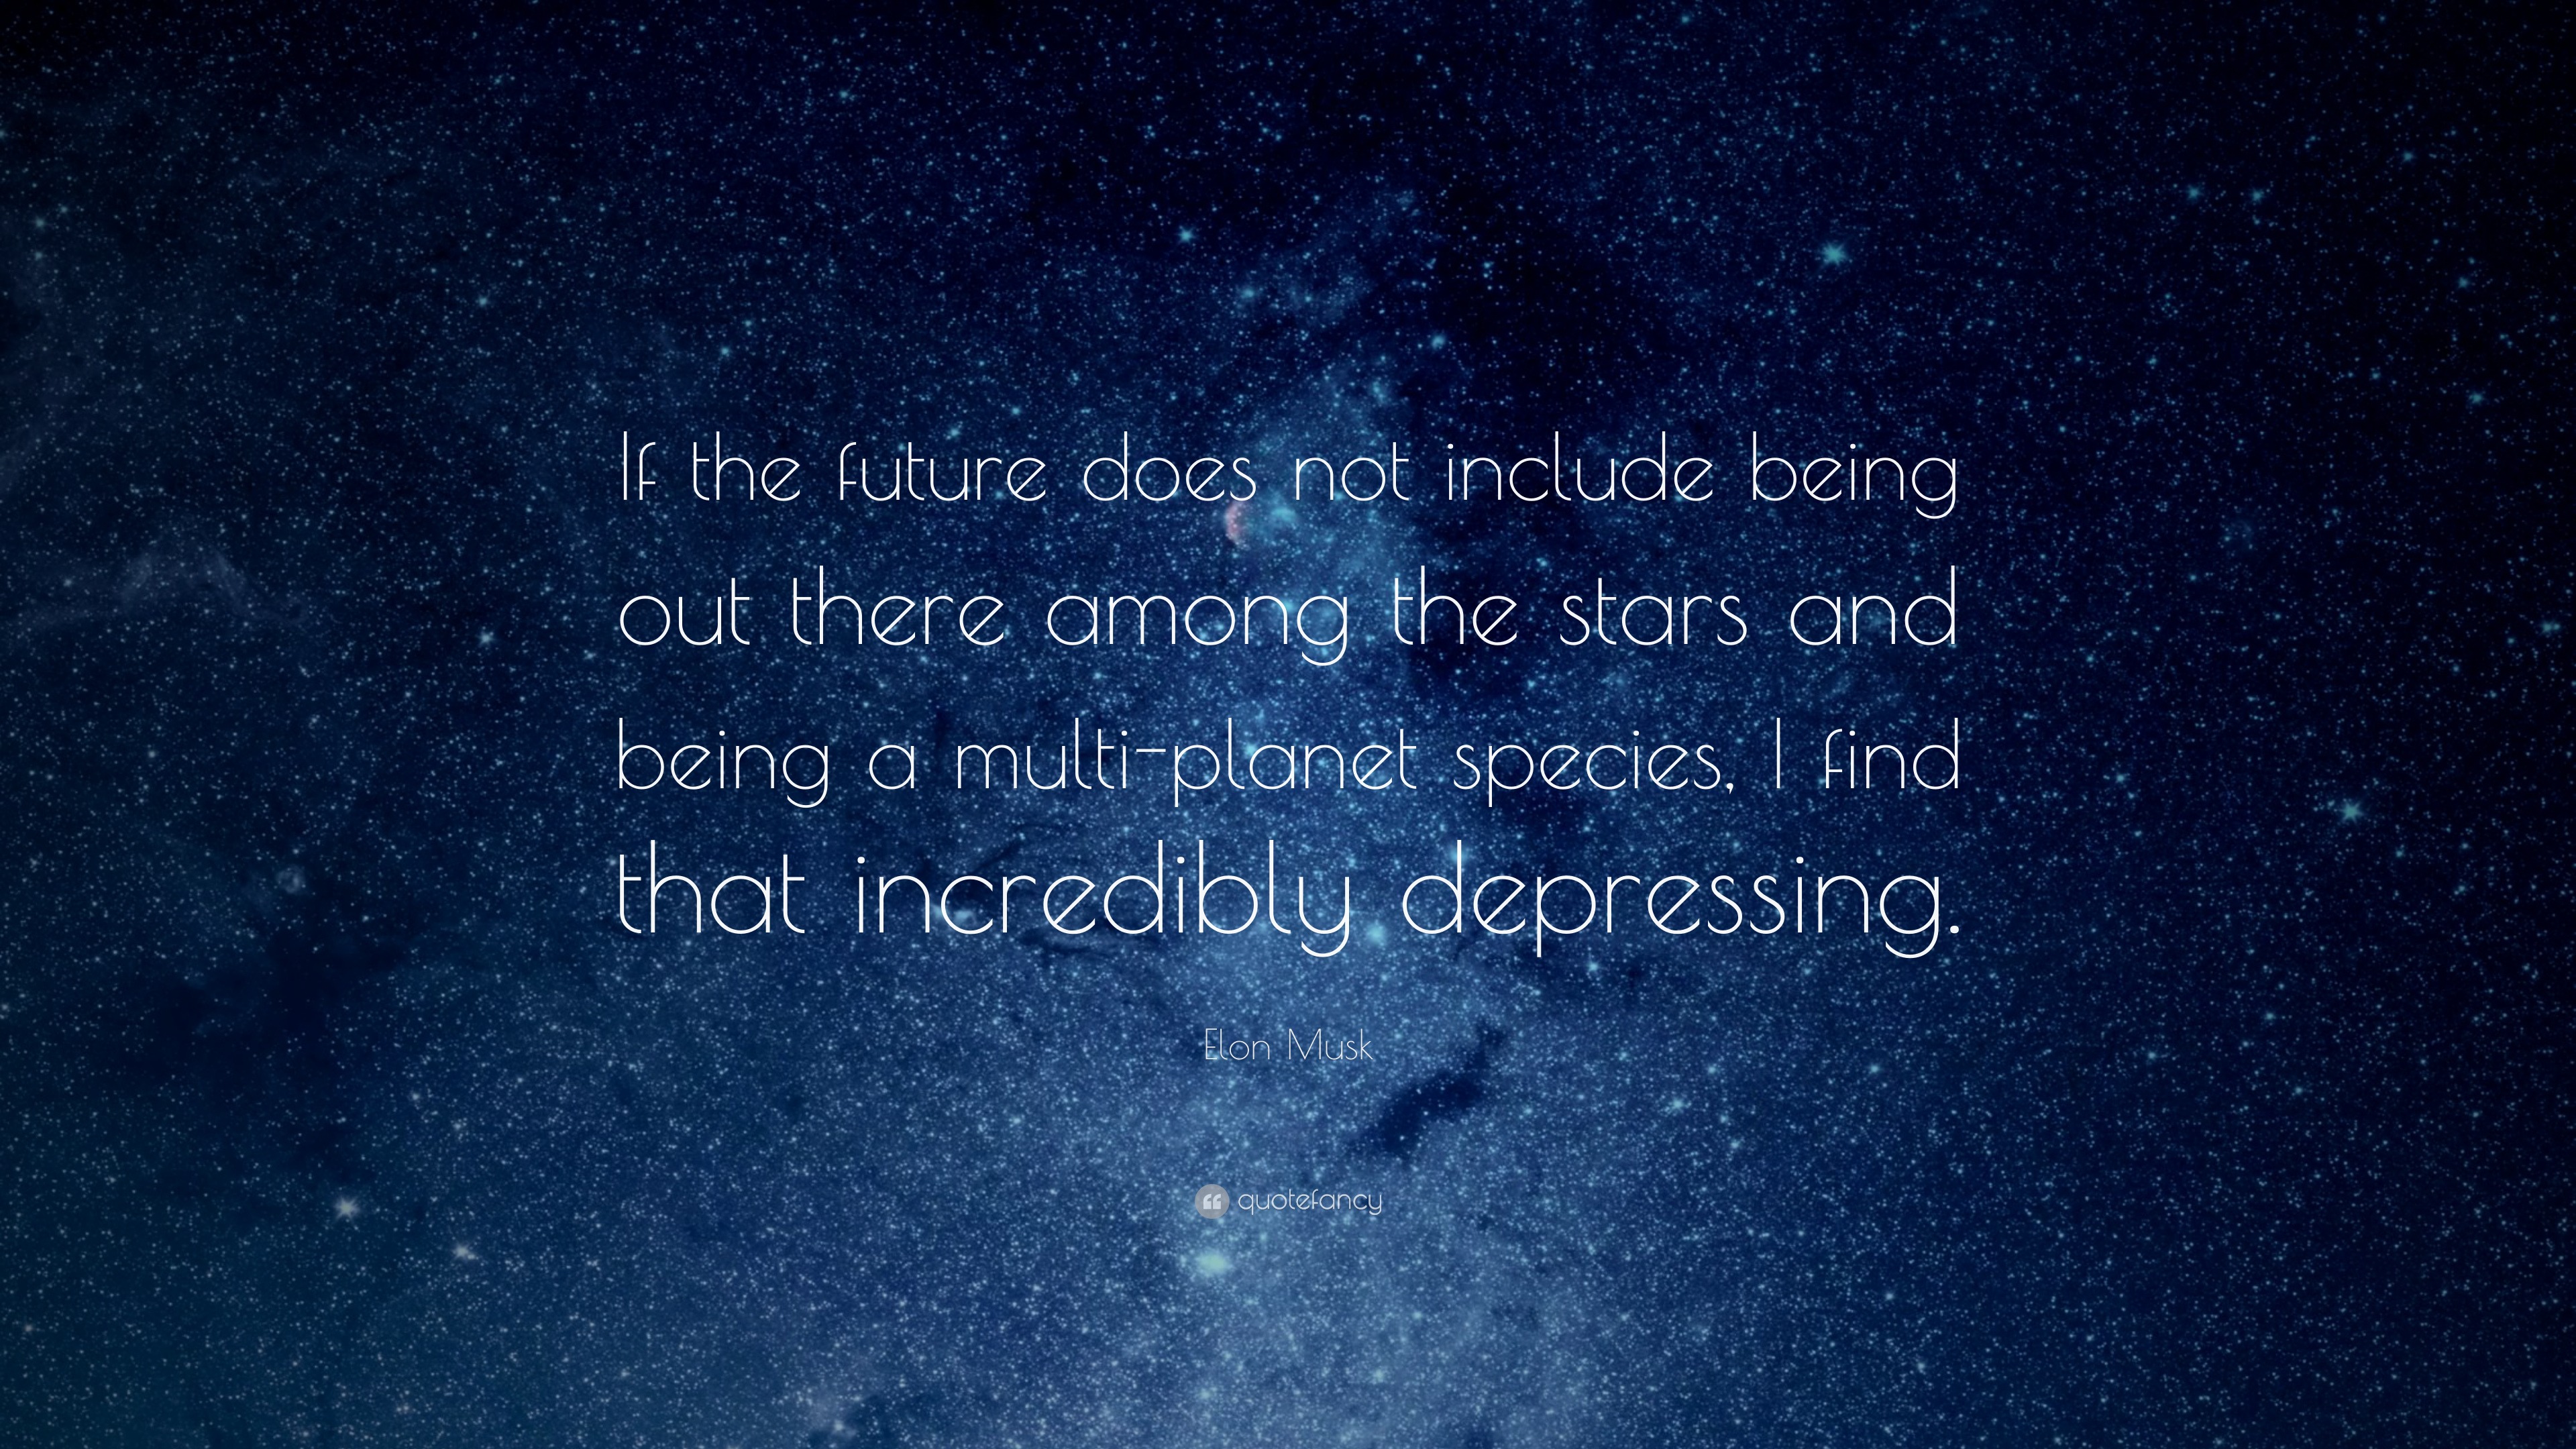 Elon Musk Quote: “If the future does not include being out there among ...